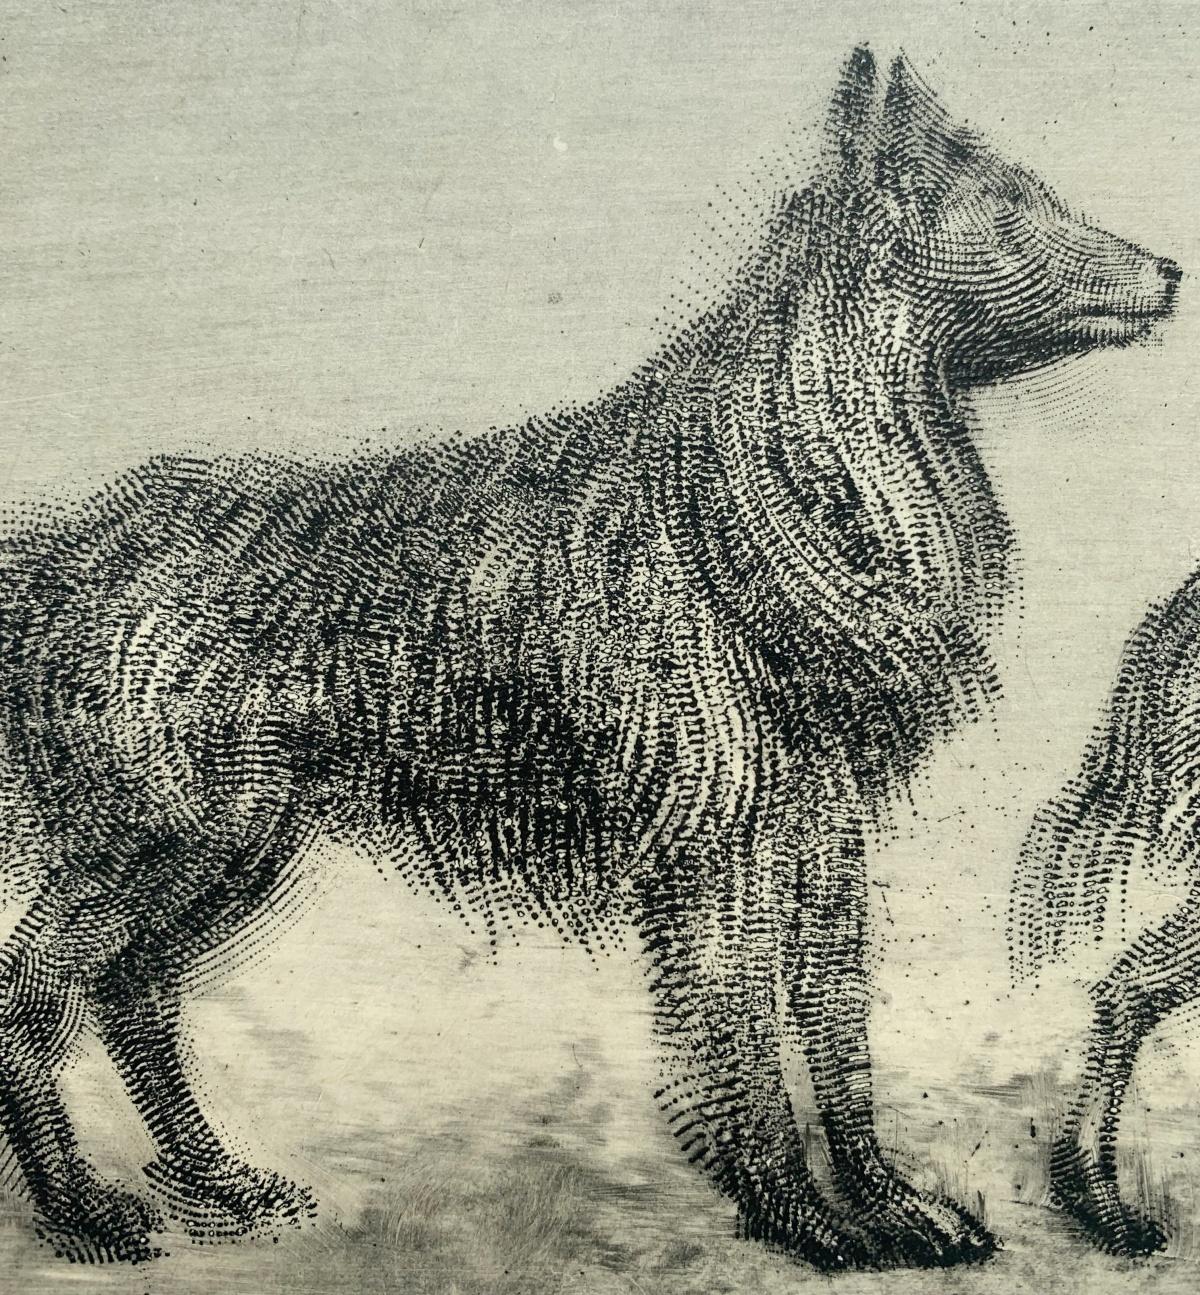 Contemporary figurative etching print by Polish arist living in Canada, Pawel Zablocki. Print depicts three dogs standing in line, each in different pose. Artist's unique technique of printmaking creates interesting effect of visual texture. 

PAWEL